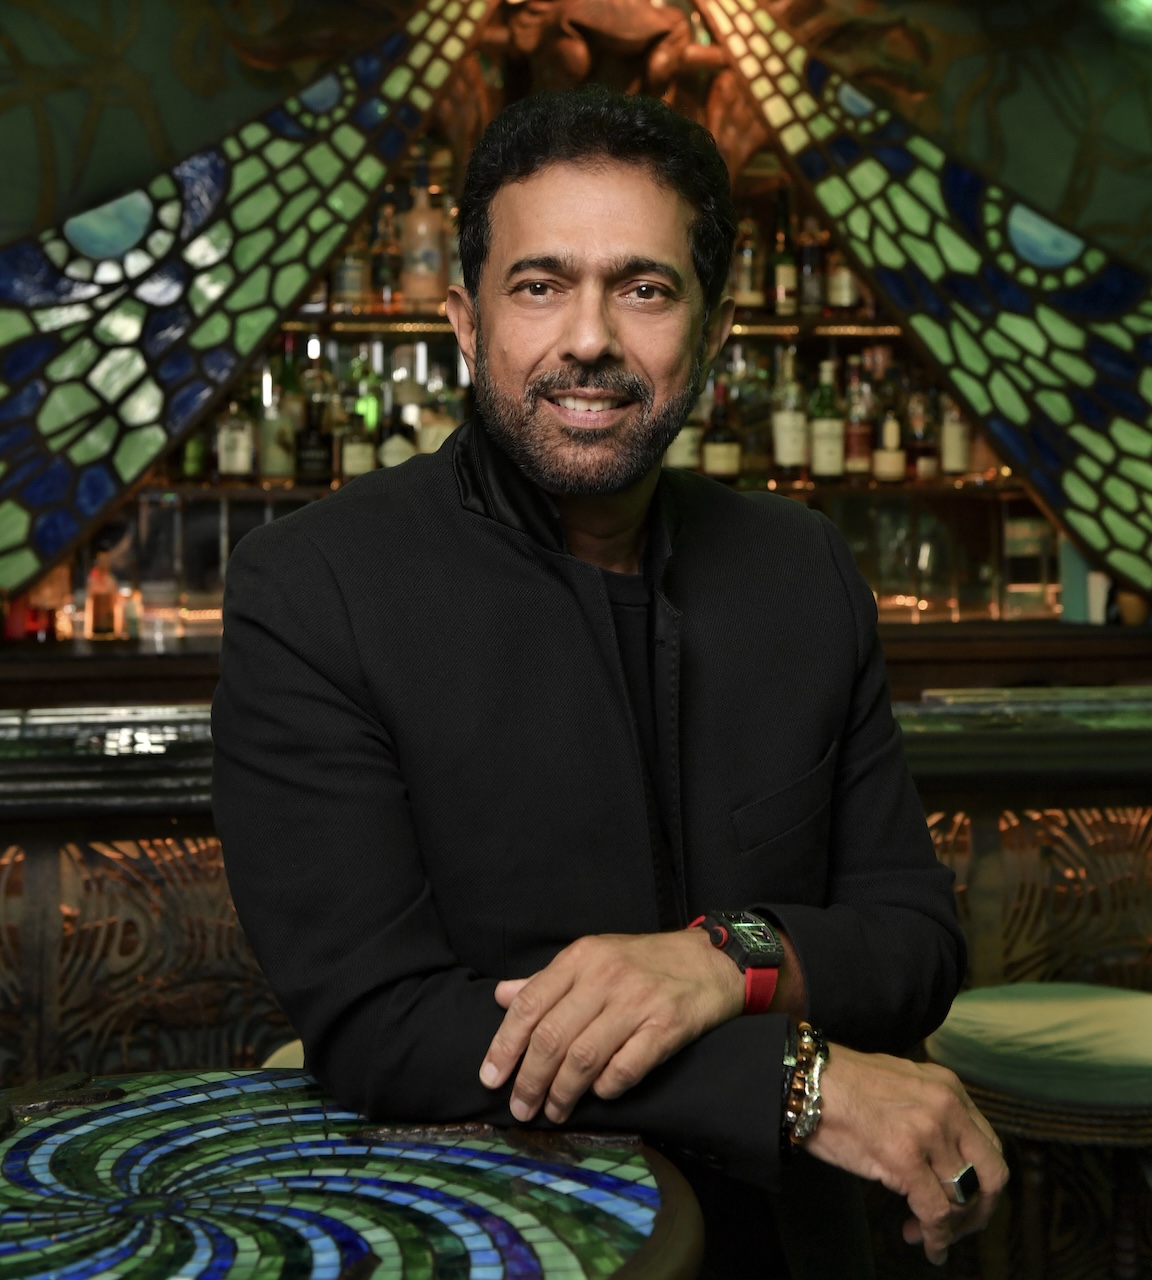 After bringing several unique bar concepts to Hong Kong, F&B visionary Sandeep Sekhri is now poised to export his Boutique Bars brand to Southeast Asia.